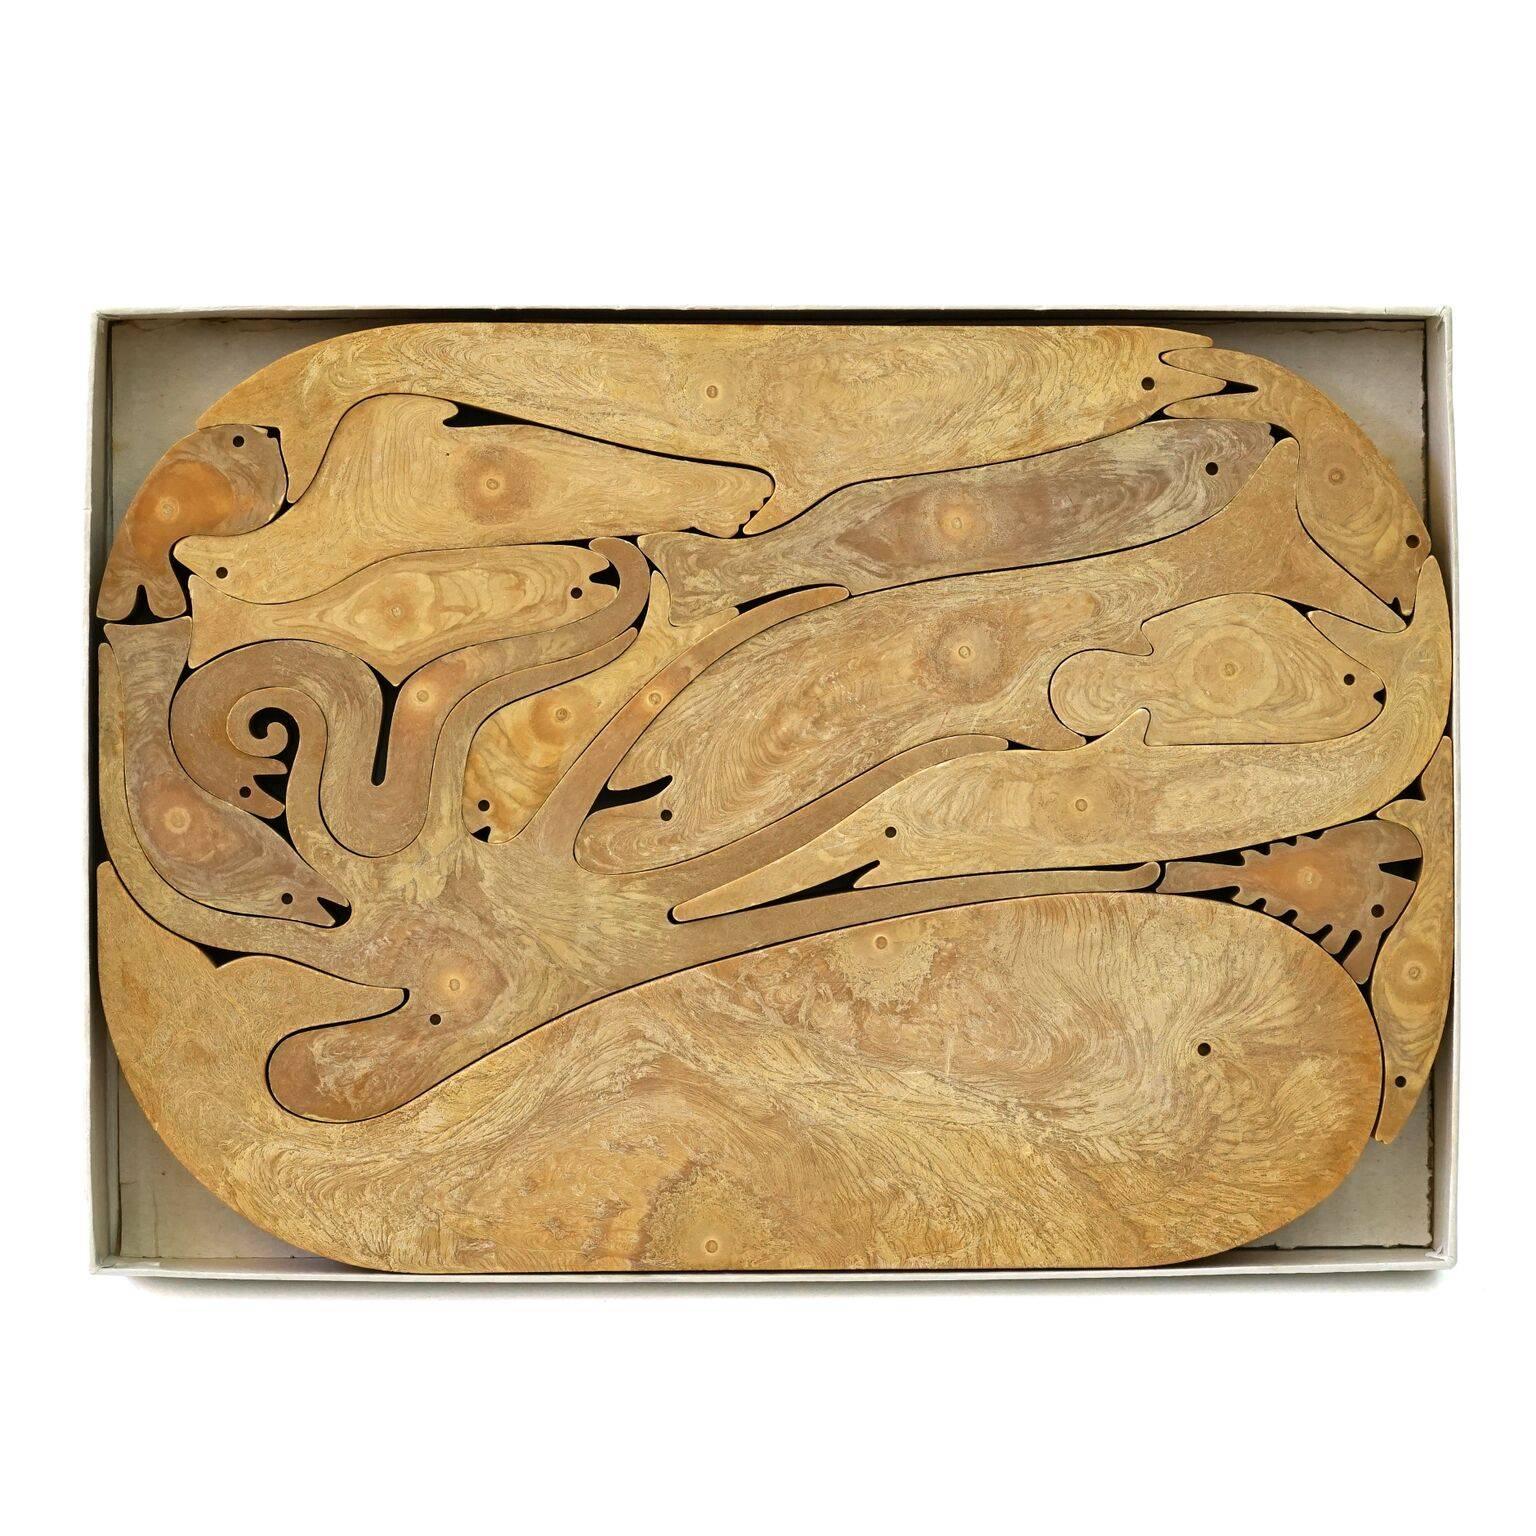 Enzo Mari created this puzzle for Danese. The puzzle is made of expandable resin made to look resemble wood. The title is 